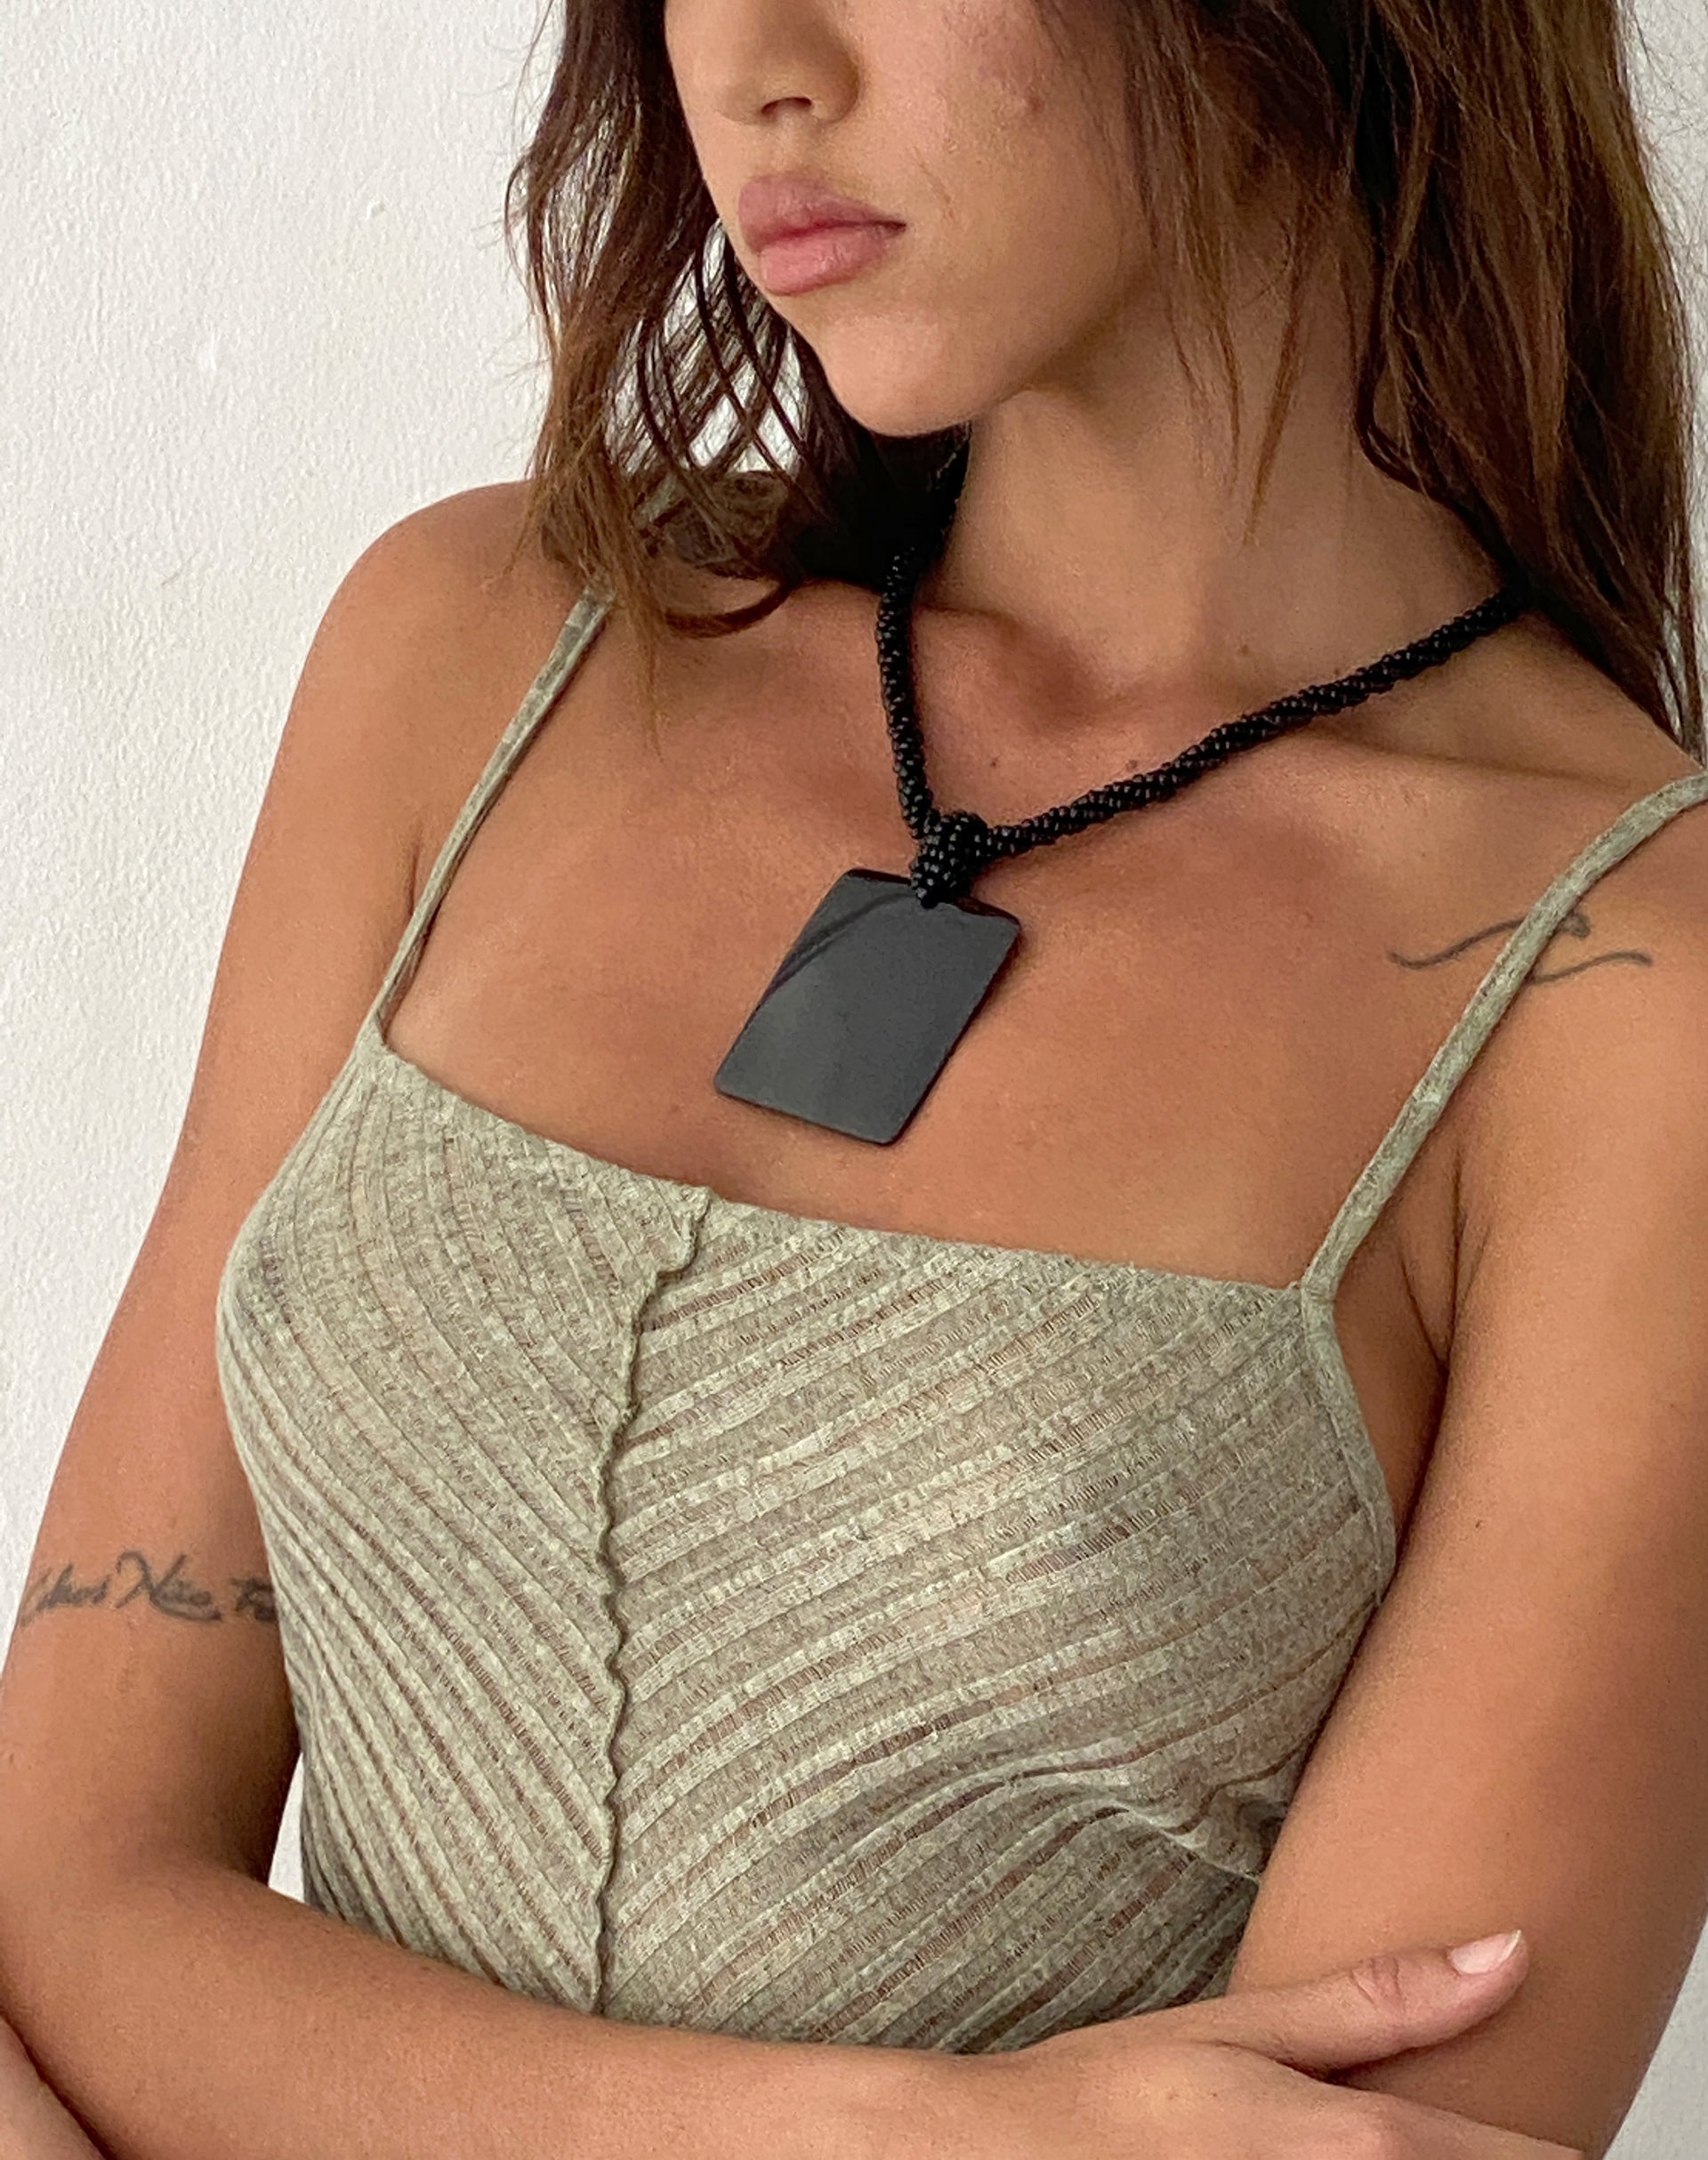 image of Bara Necklace with Black Rectangle Pendant